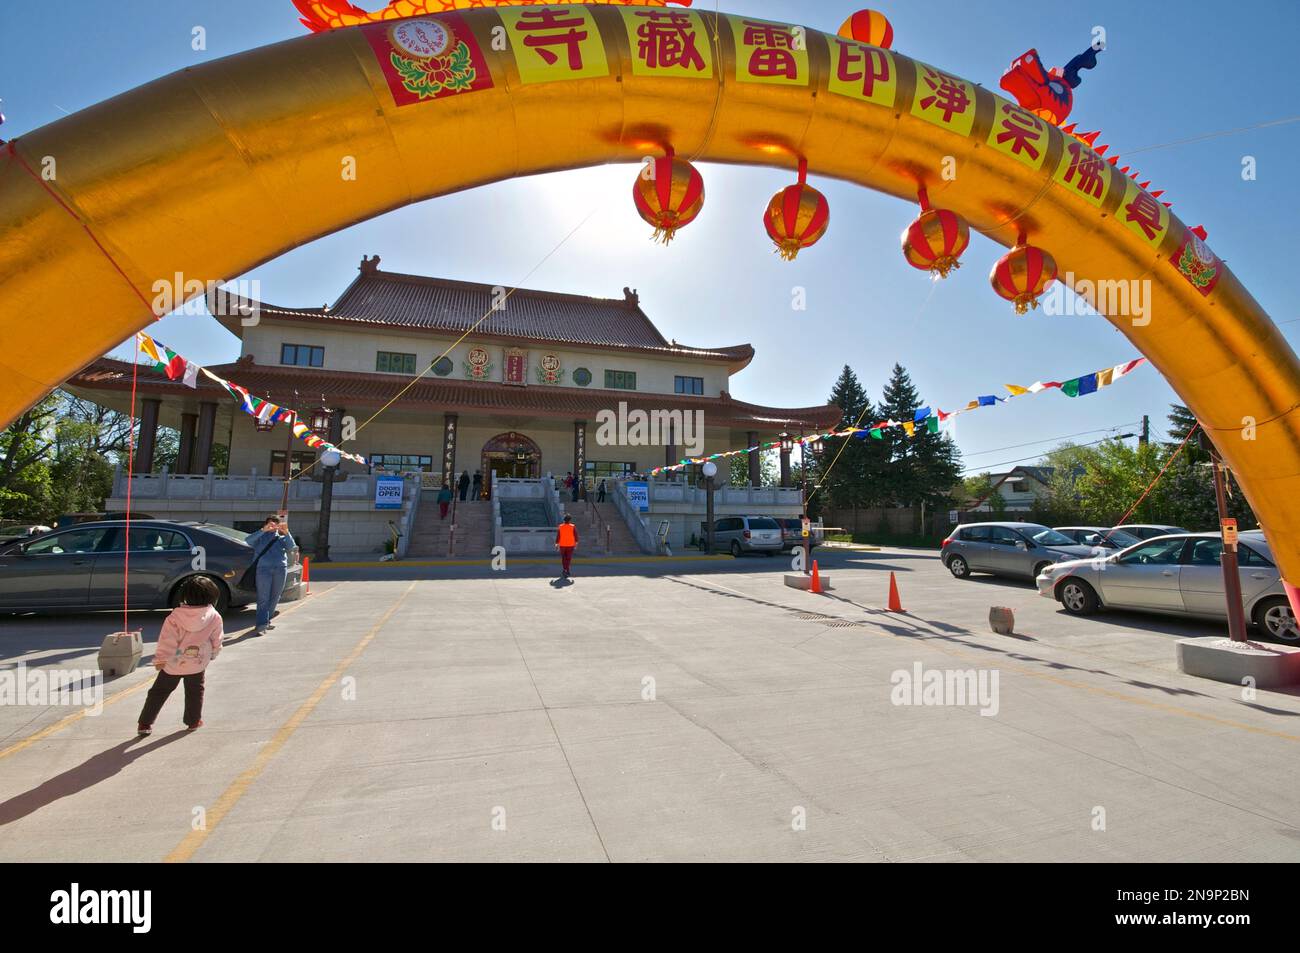 Toronto, Ontario / Canada - May 26, 2013: Building exterior of a Buddies temple with a golden colour arch. Stock Photo